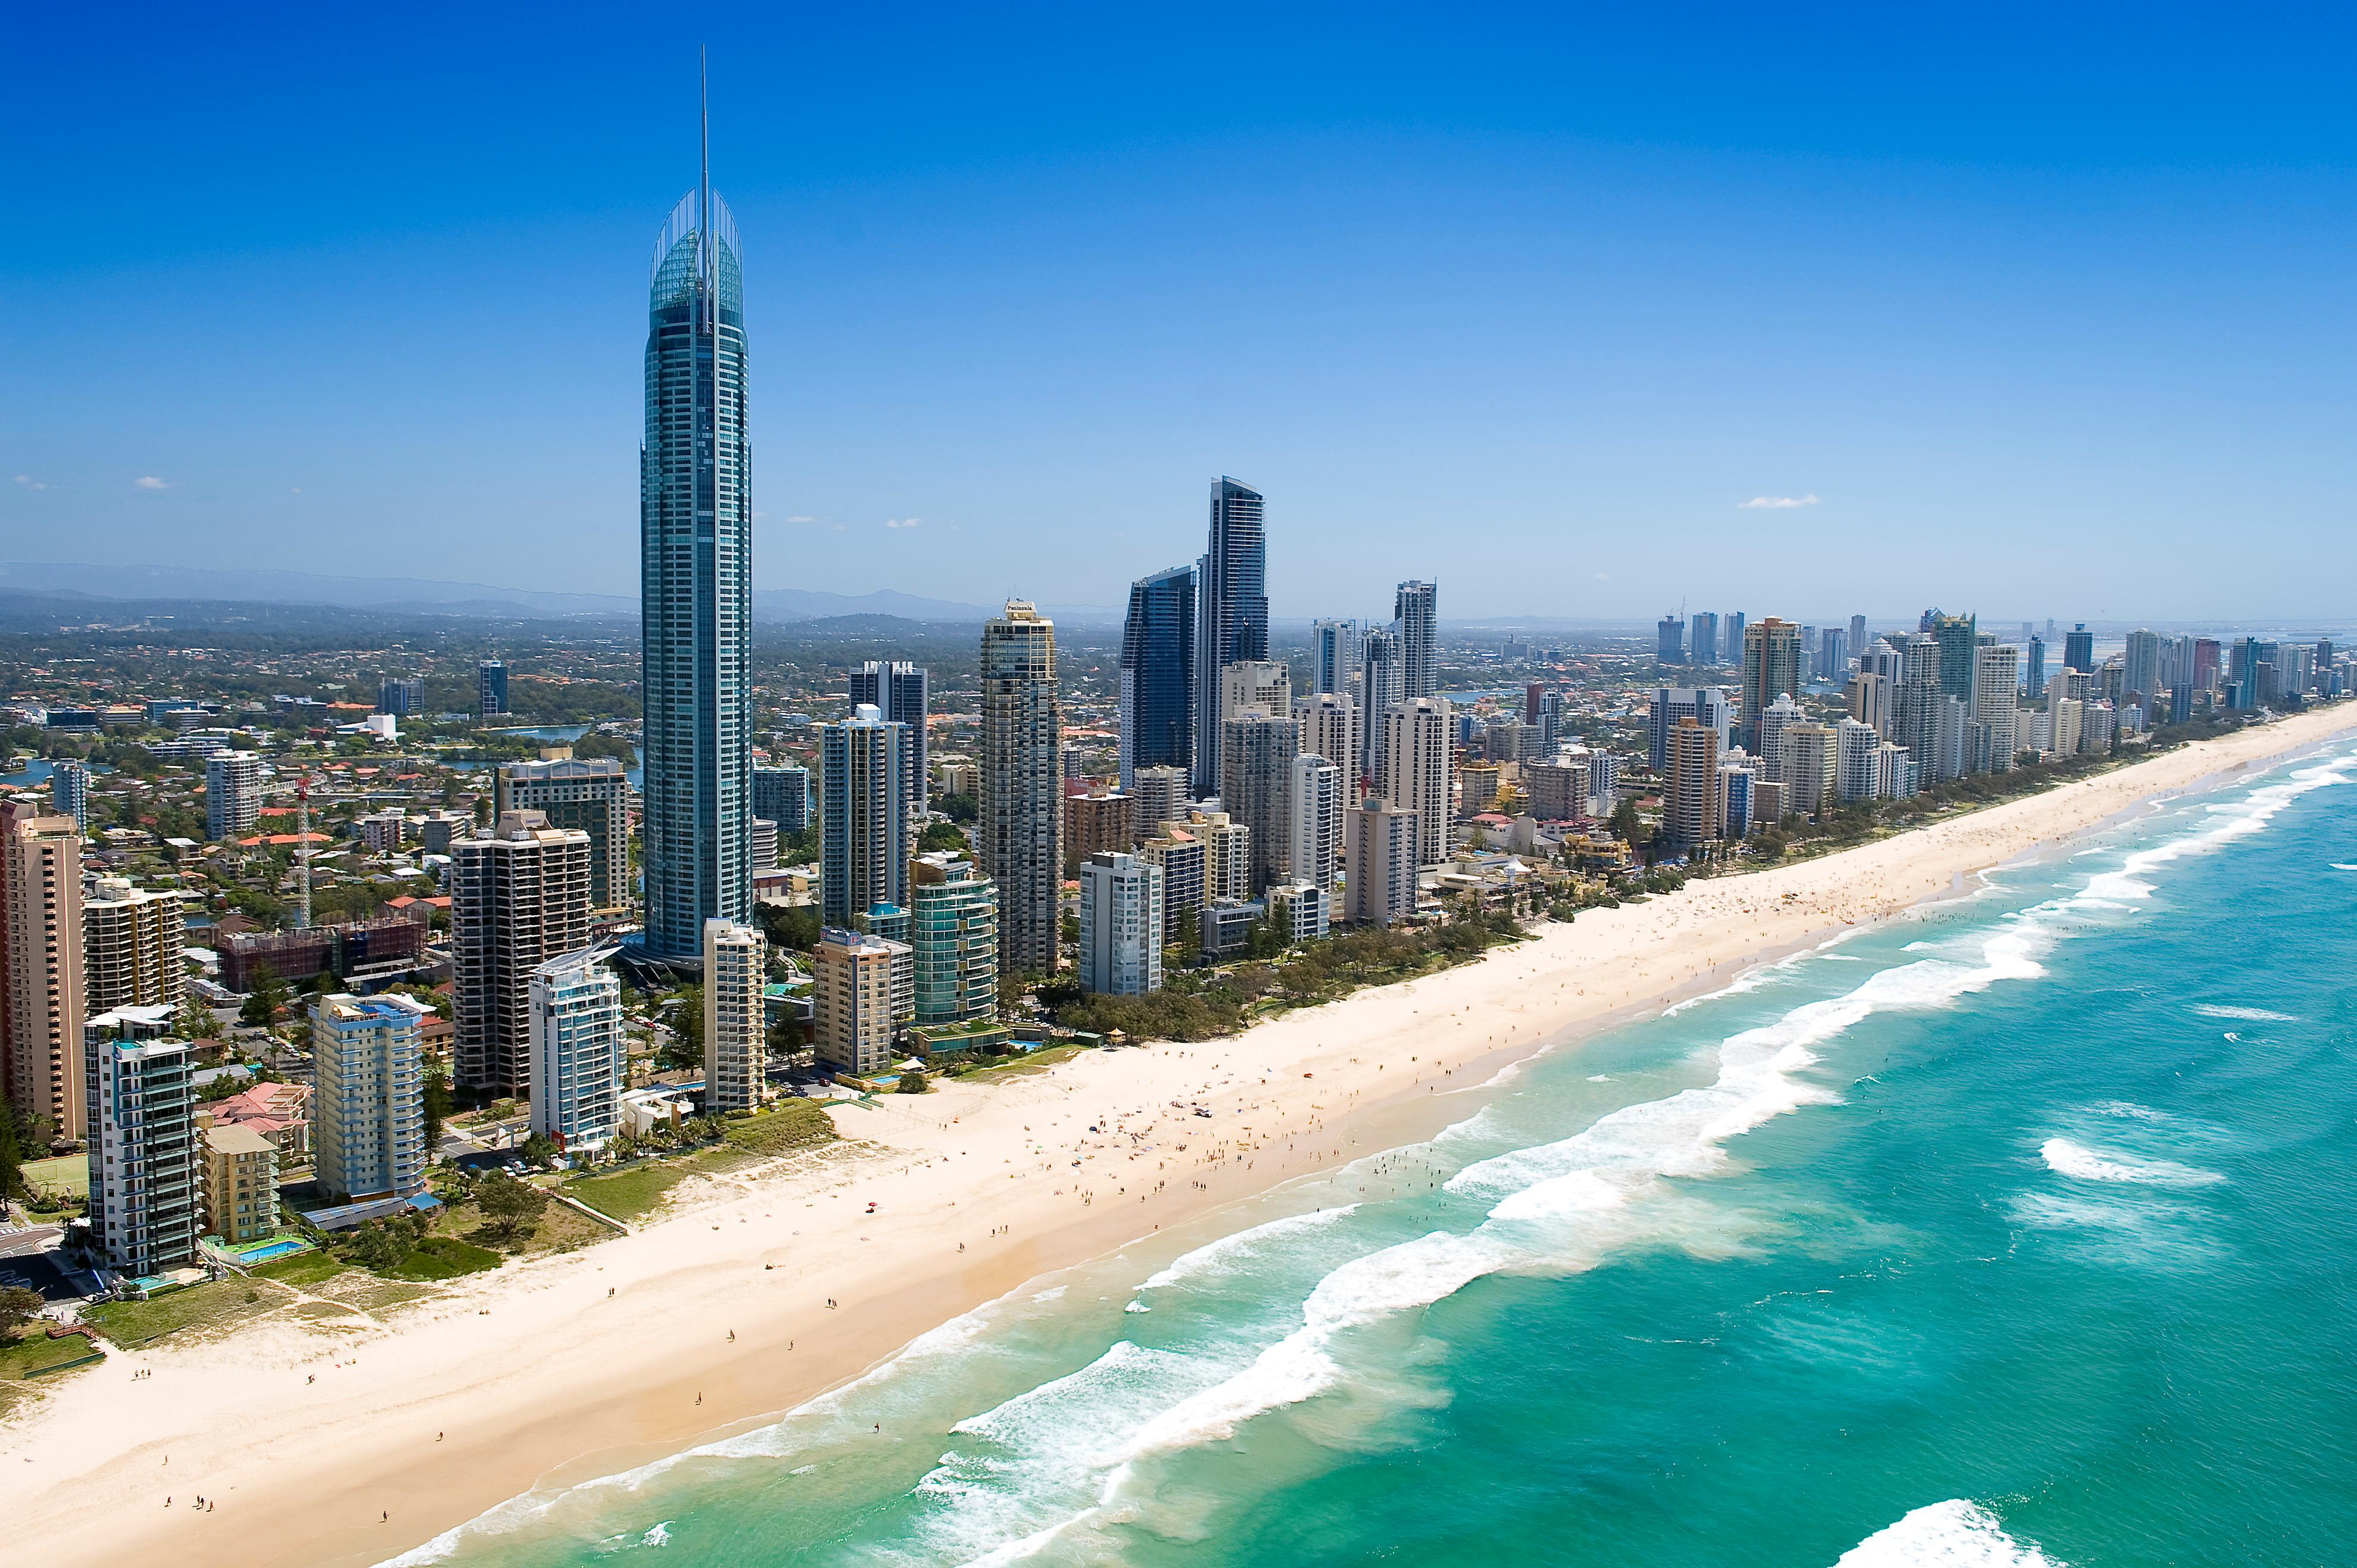 surfers paradise 4k Ultra HD Wallpaper and Background Image ...